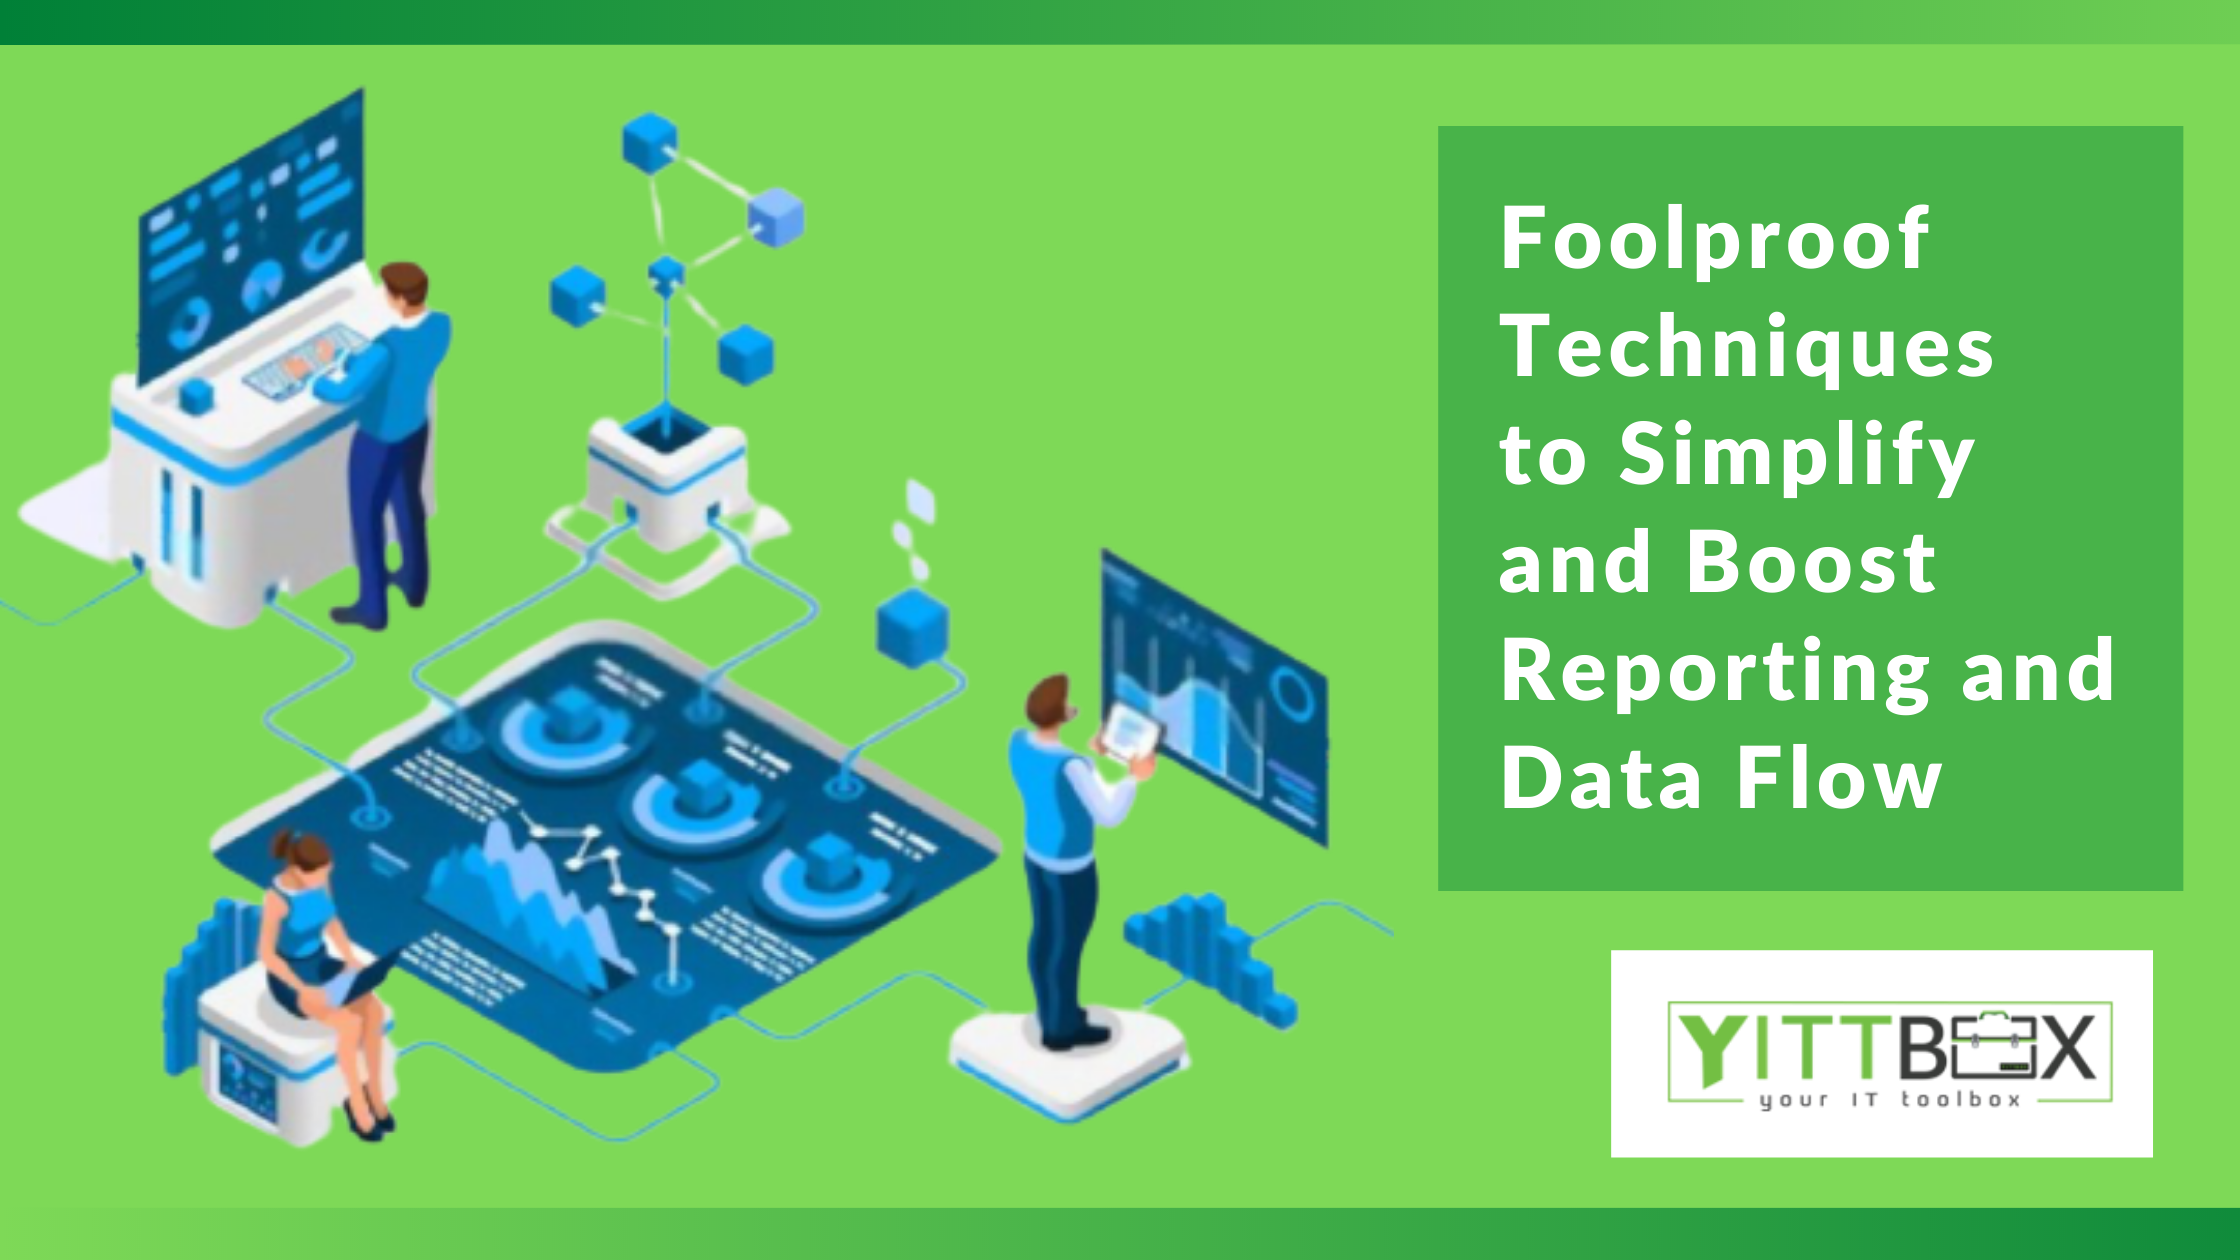 Foolproof Techniques to Simplify and Boost Reporting and Data Flown